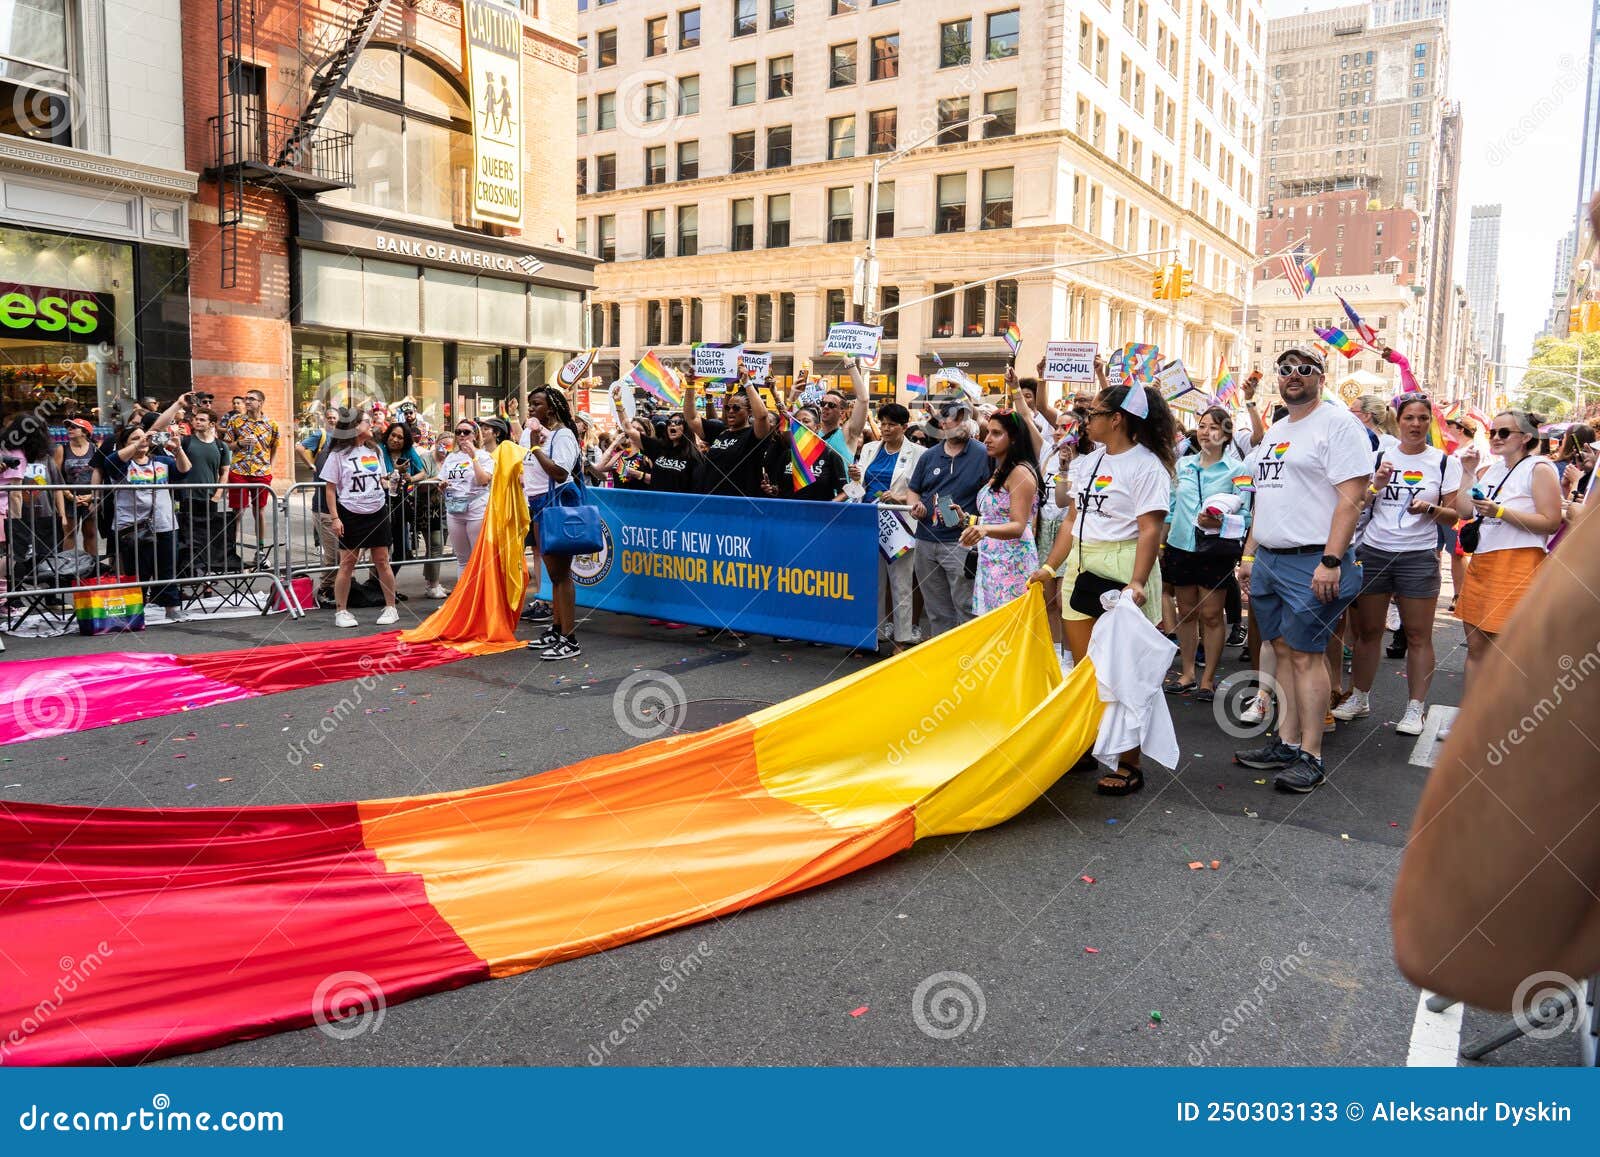 NYC LGBTQ Pride Parade on 5th Ave in Manhattan, New York on June 26